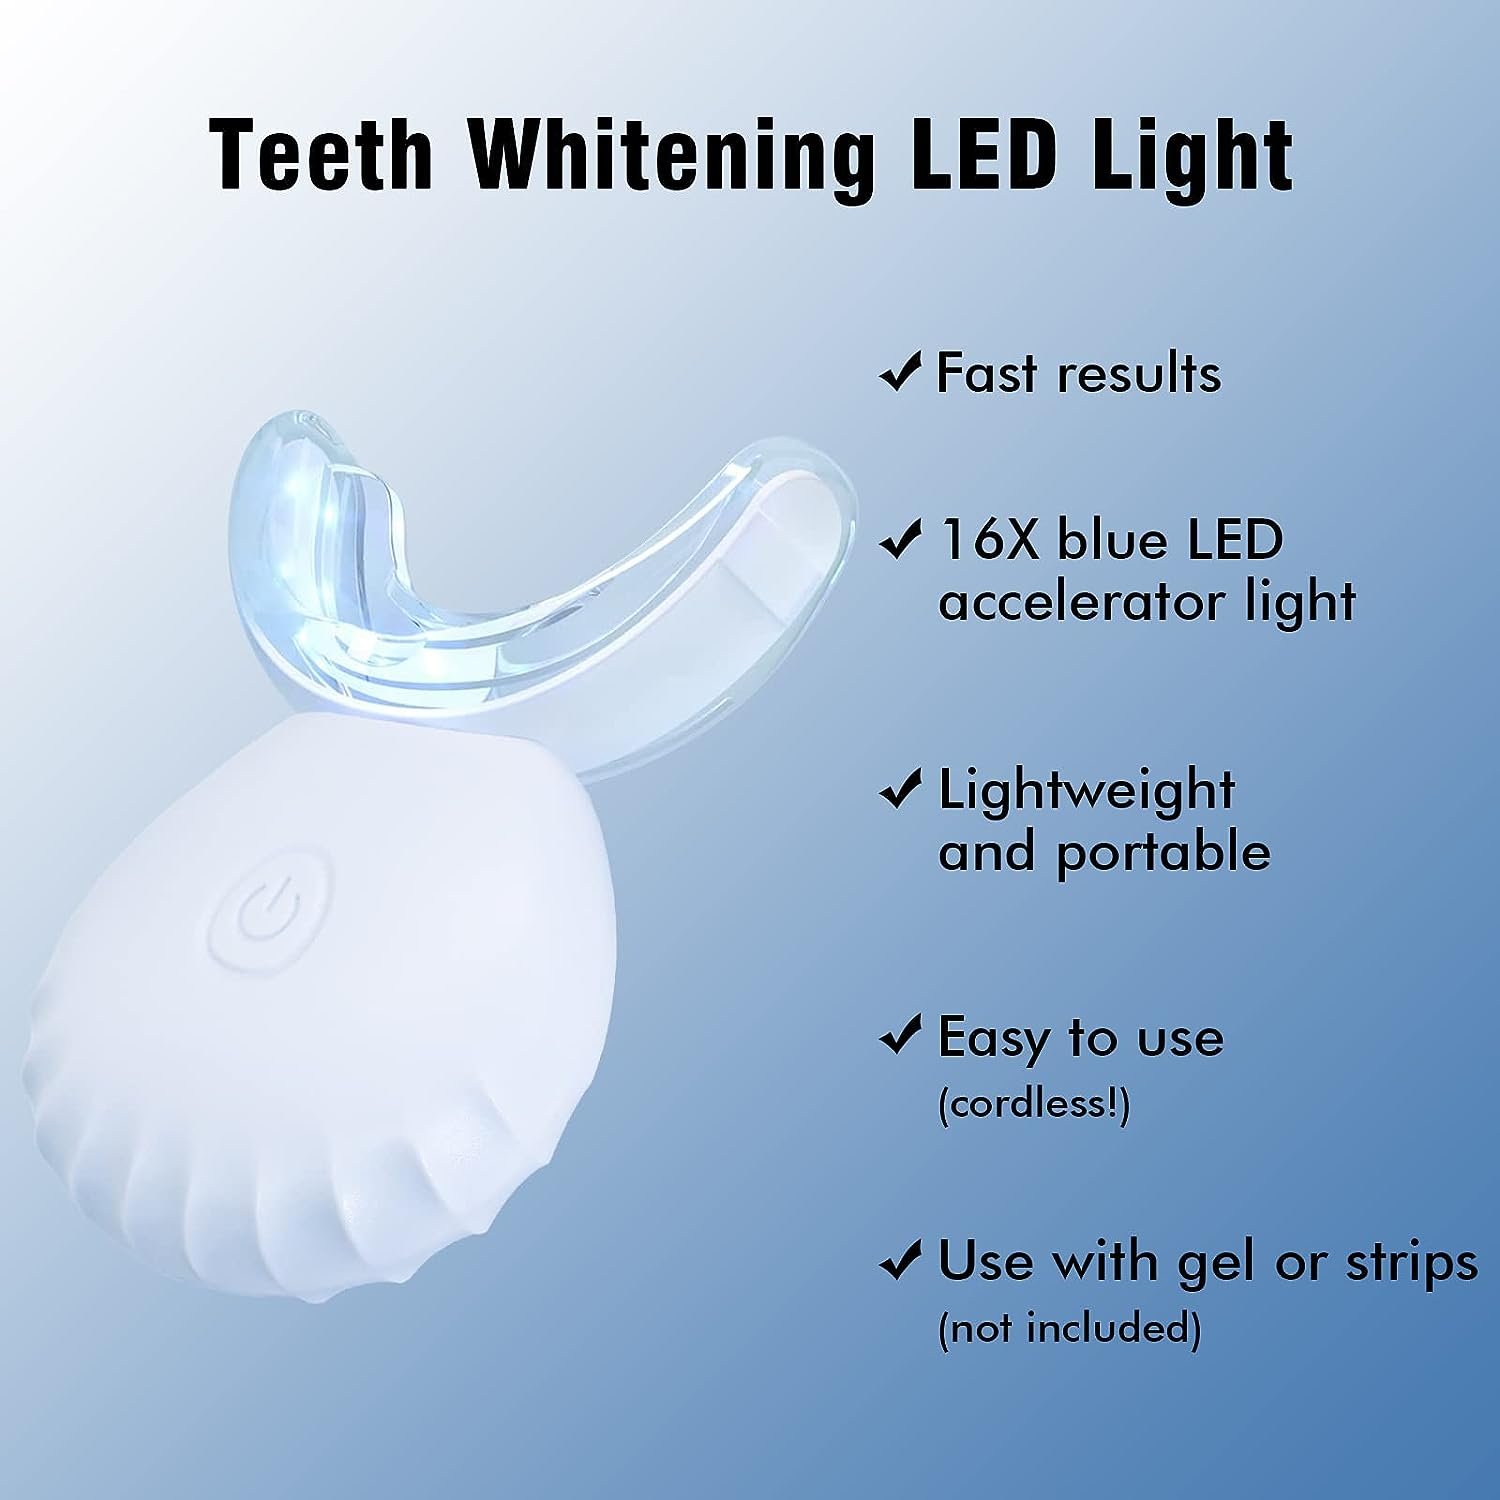 EOICCEOH Teeth Whitening Light, 10X More Powerful Blue Led Teeth Whitening Accelerator Light Connected with USB, Non-Battery Teeth Whitening LED Light for Teeth Whitening Enhancer in Home Use